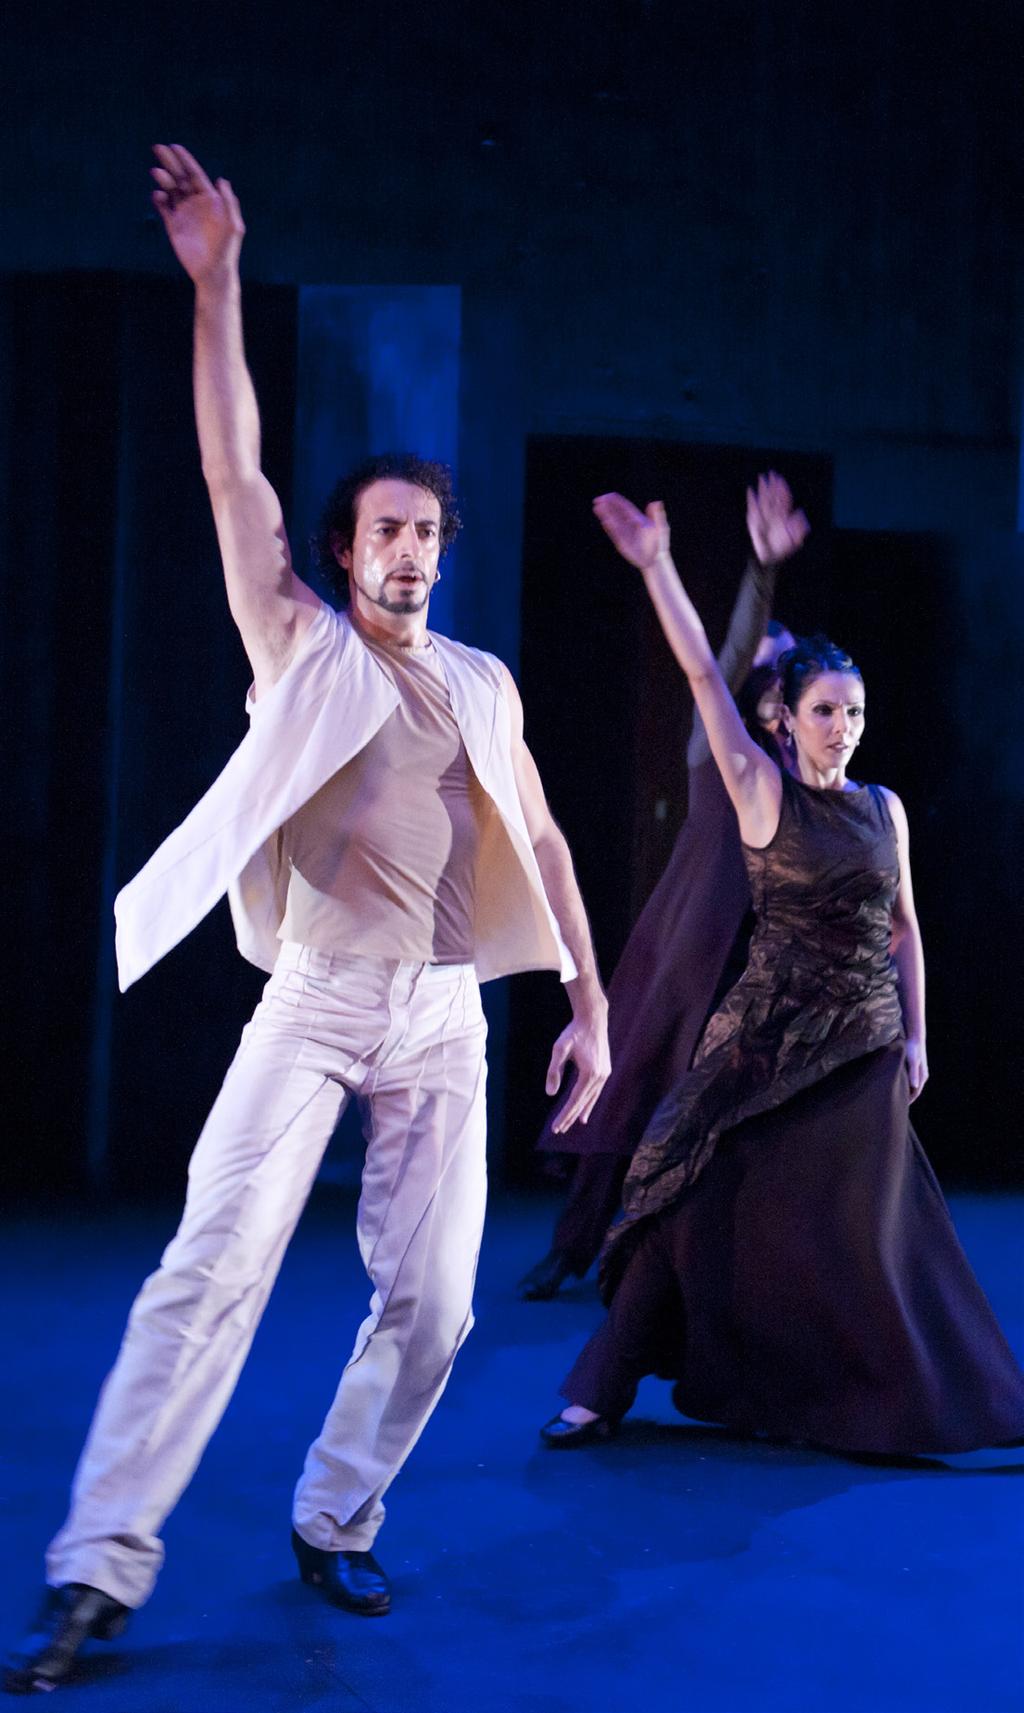 Flamencos en route Dance Company canto amor 6 Choreography canto amor Orpheus and Eurydice, the Story from Ancient Greece Orpheus enchants everyone with his charms even the underworld is touched by